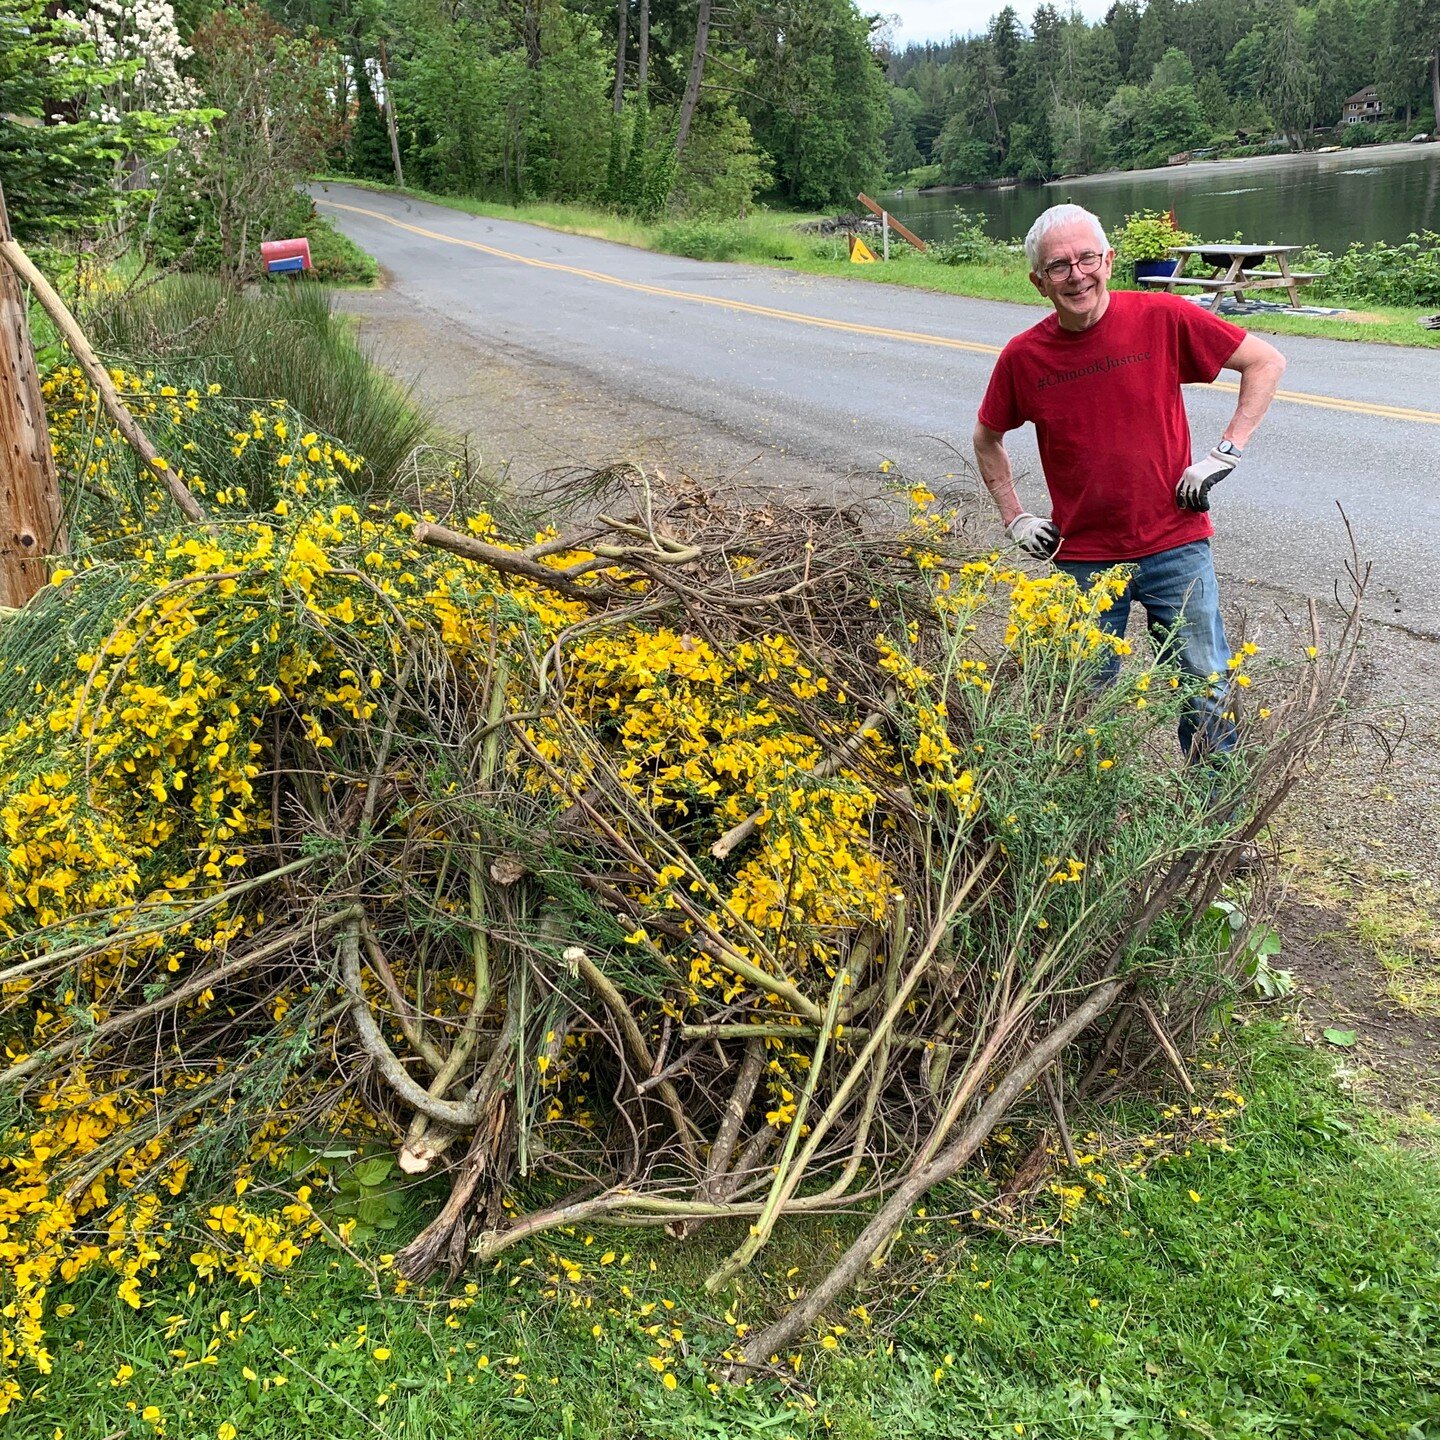 Look at these two heroes wrangling invasive scotch broom around Little Manzanita Bay.

This is the best time to cut it down before it goes to seed. 

We are fighting to preserve the tranquility of the bay and prevent the building of deep water docks 